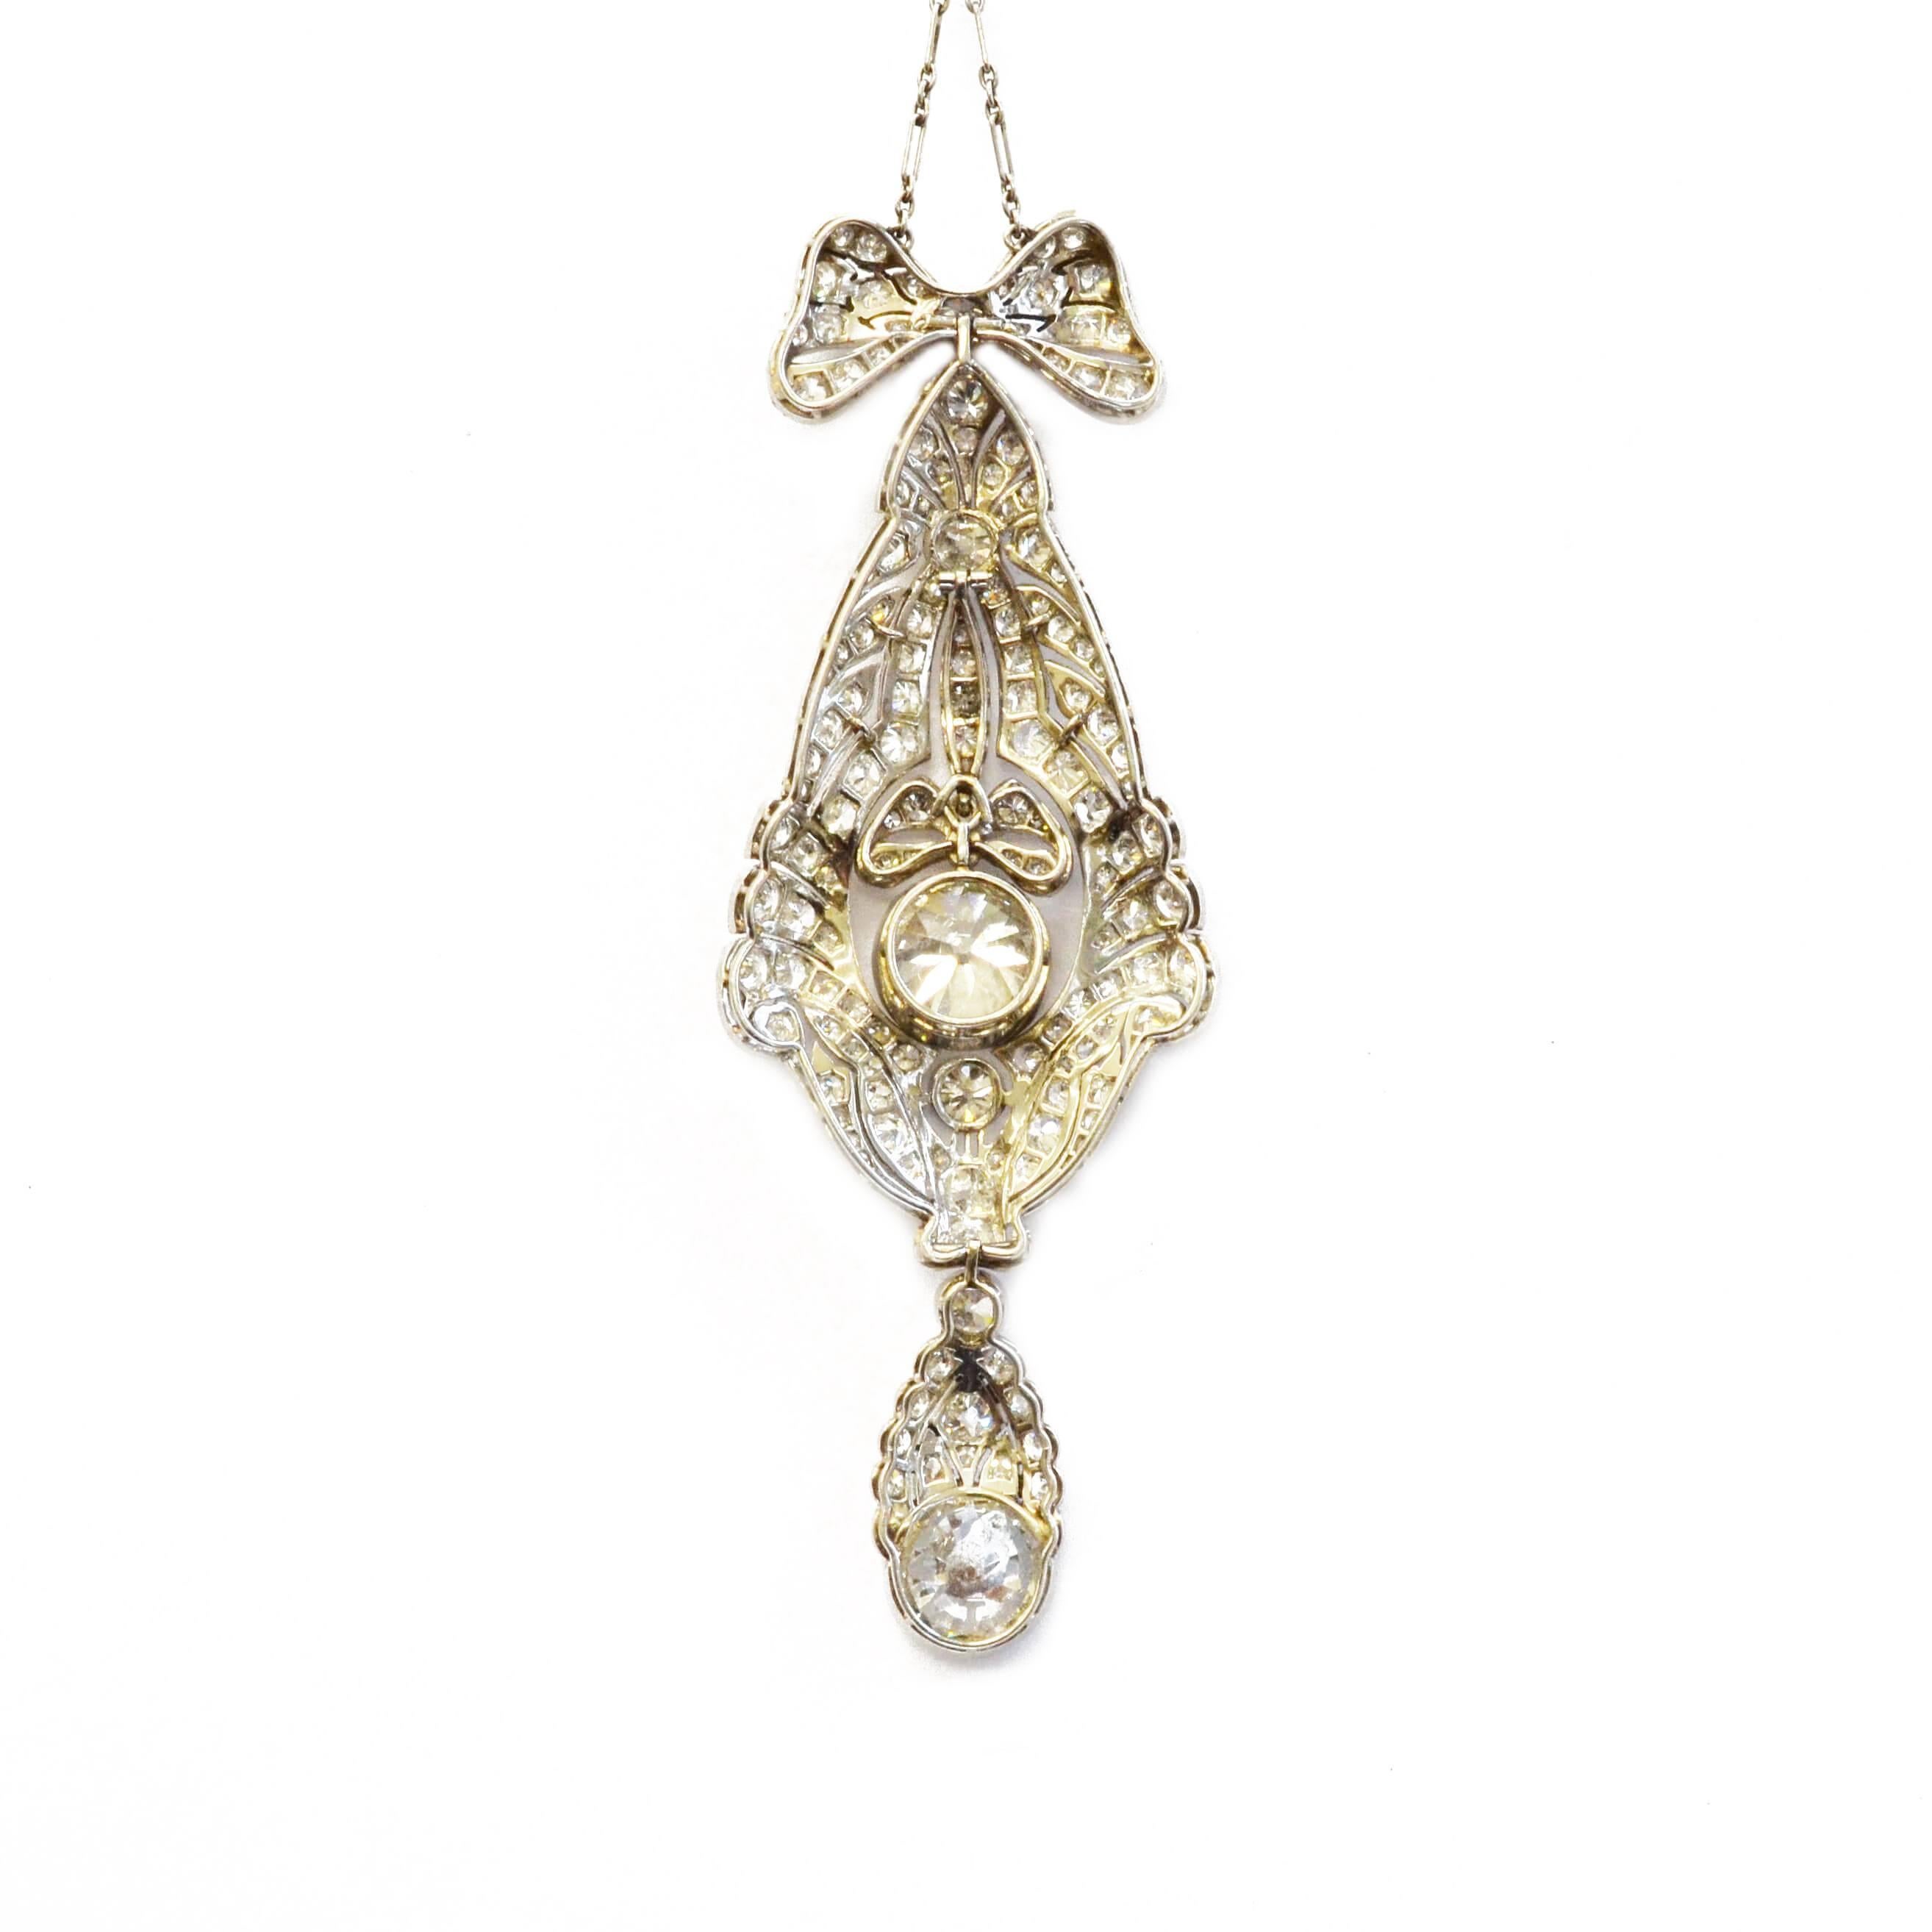 A Belle Epoque pendant of elongated design; pavé diamond set throughout. A bow suspends the decoratively pierced platinum drop which is fully articulated and centres on a substantial old cut diamond, and a further large old cut at the bottom.